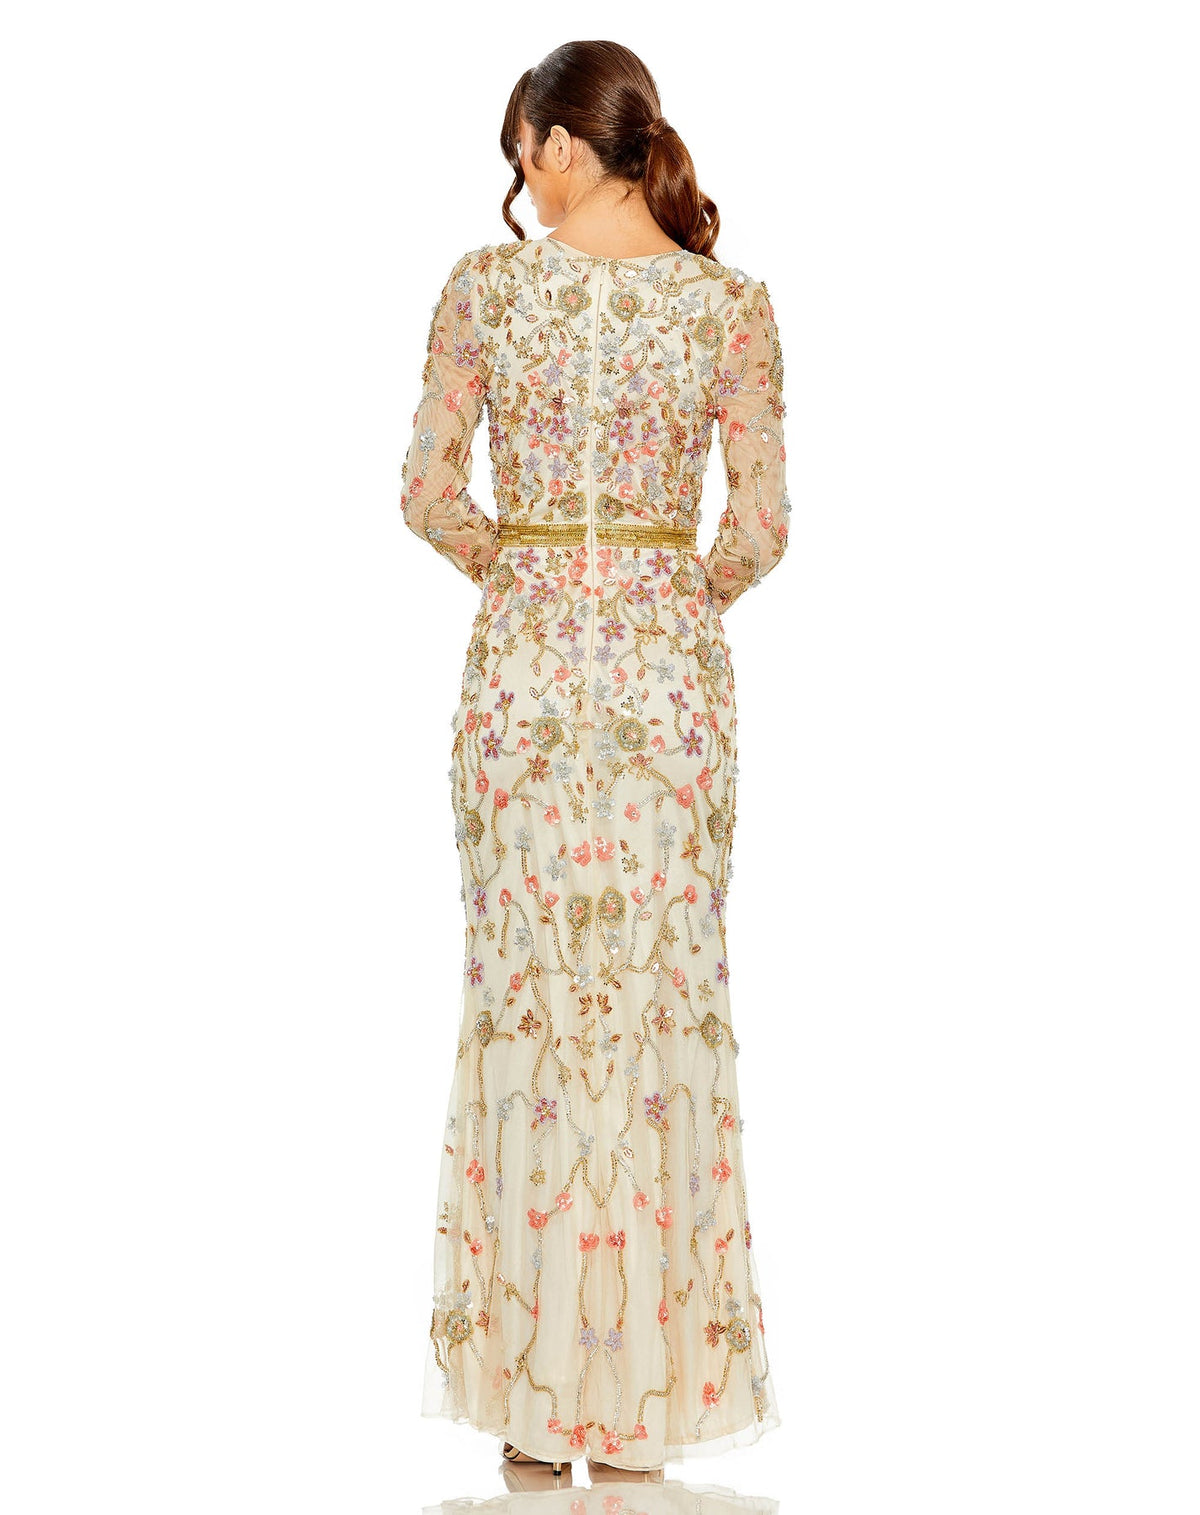 Long sleeve floral crystal embellished modest gown - Nude back view